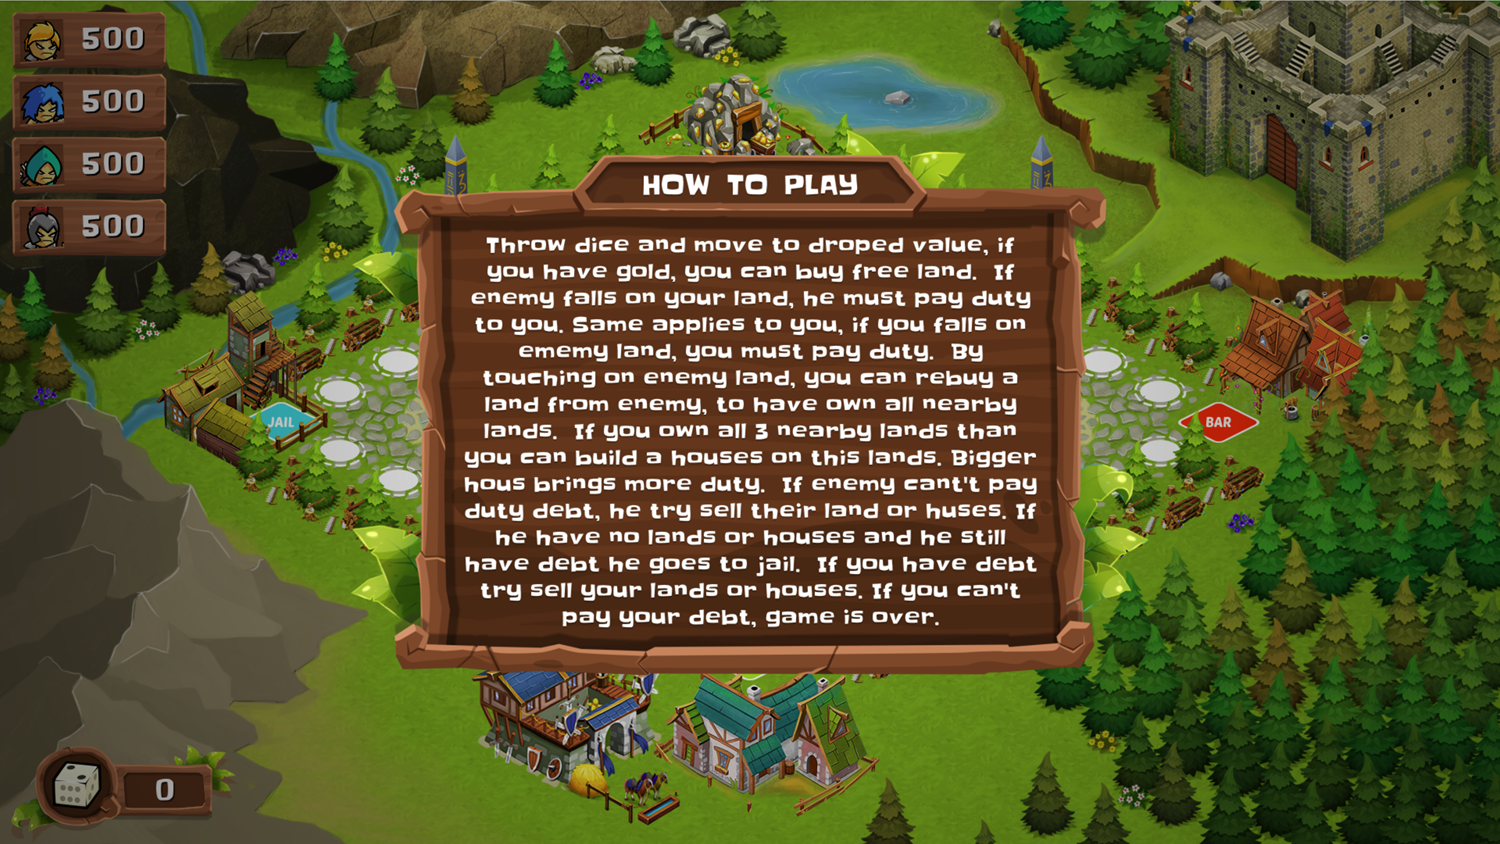 Kingdoms Wars How to Play Instructions.